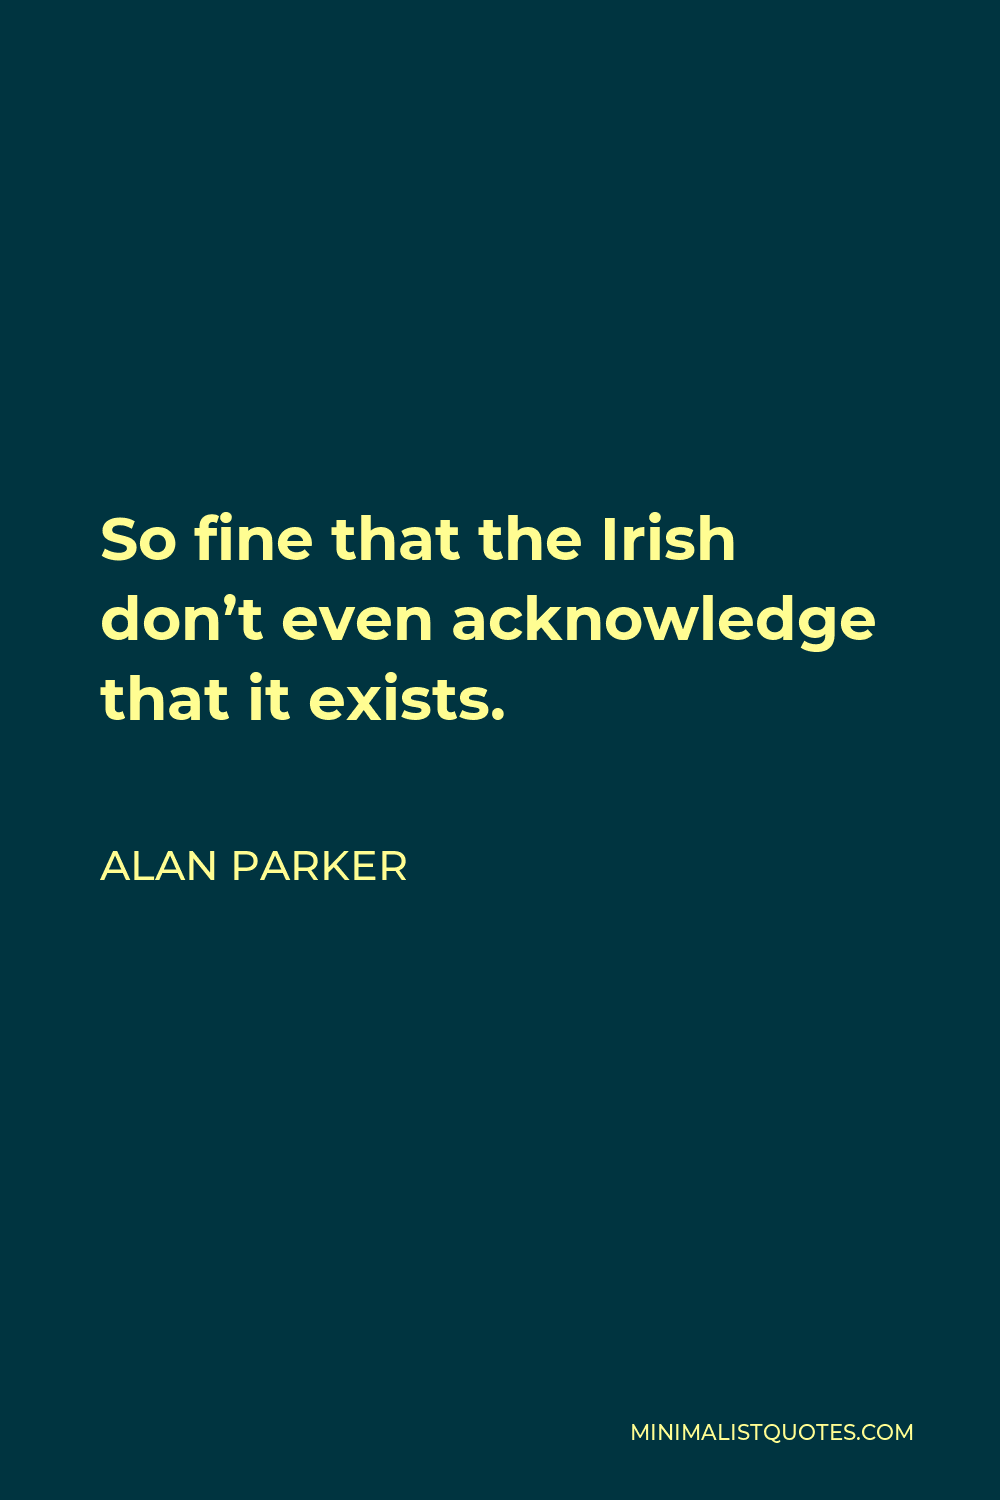 Alan Parker Quote - So fine that the Irish don’t even acknowledge that it exists.